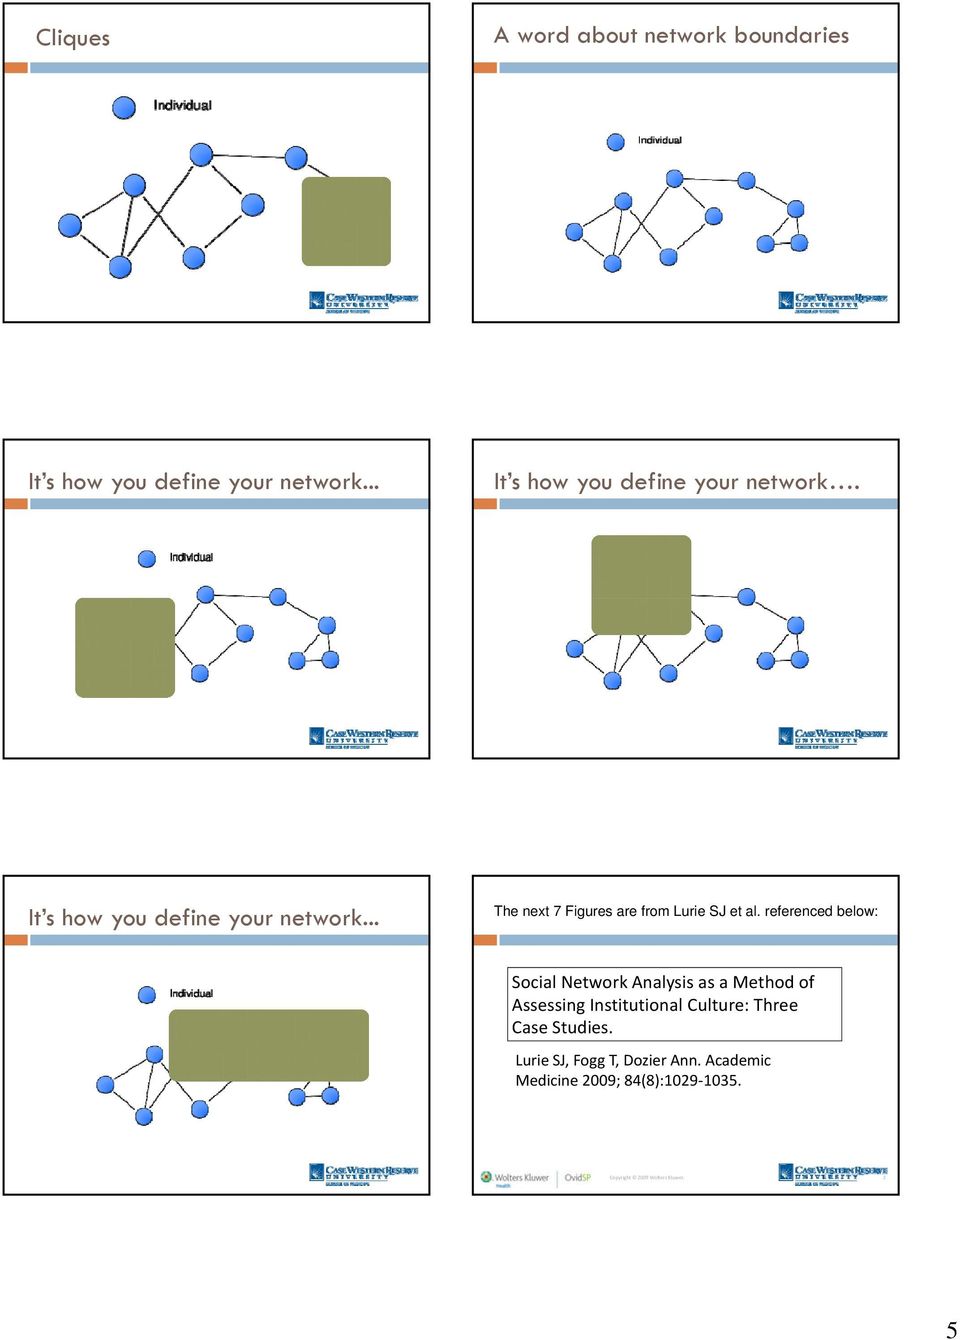 referenced below: Social Network Analysis as a Method of Assessing Institutional Culture: Three Case